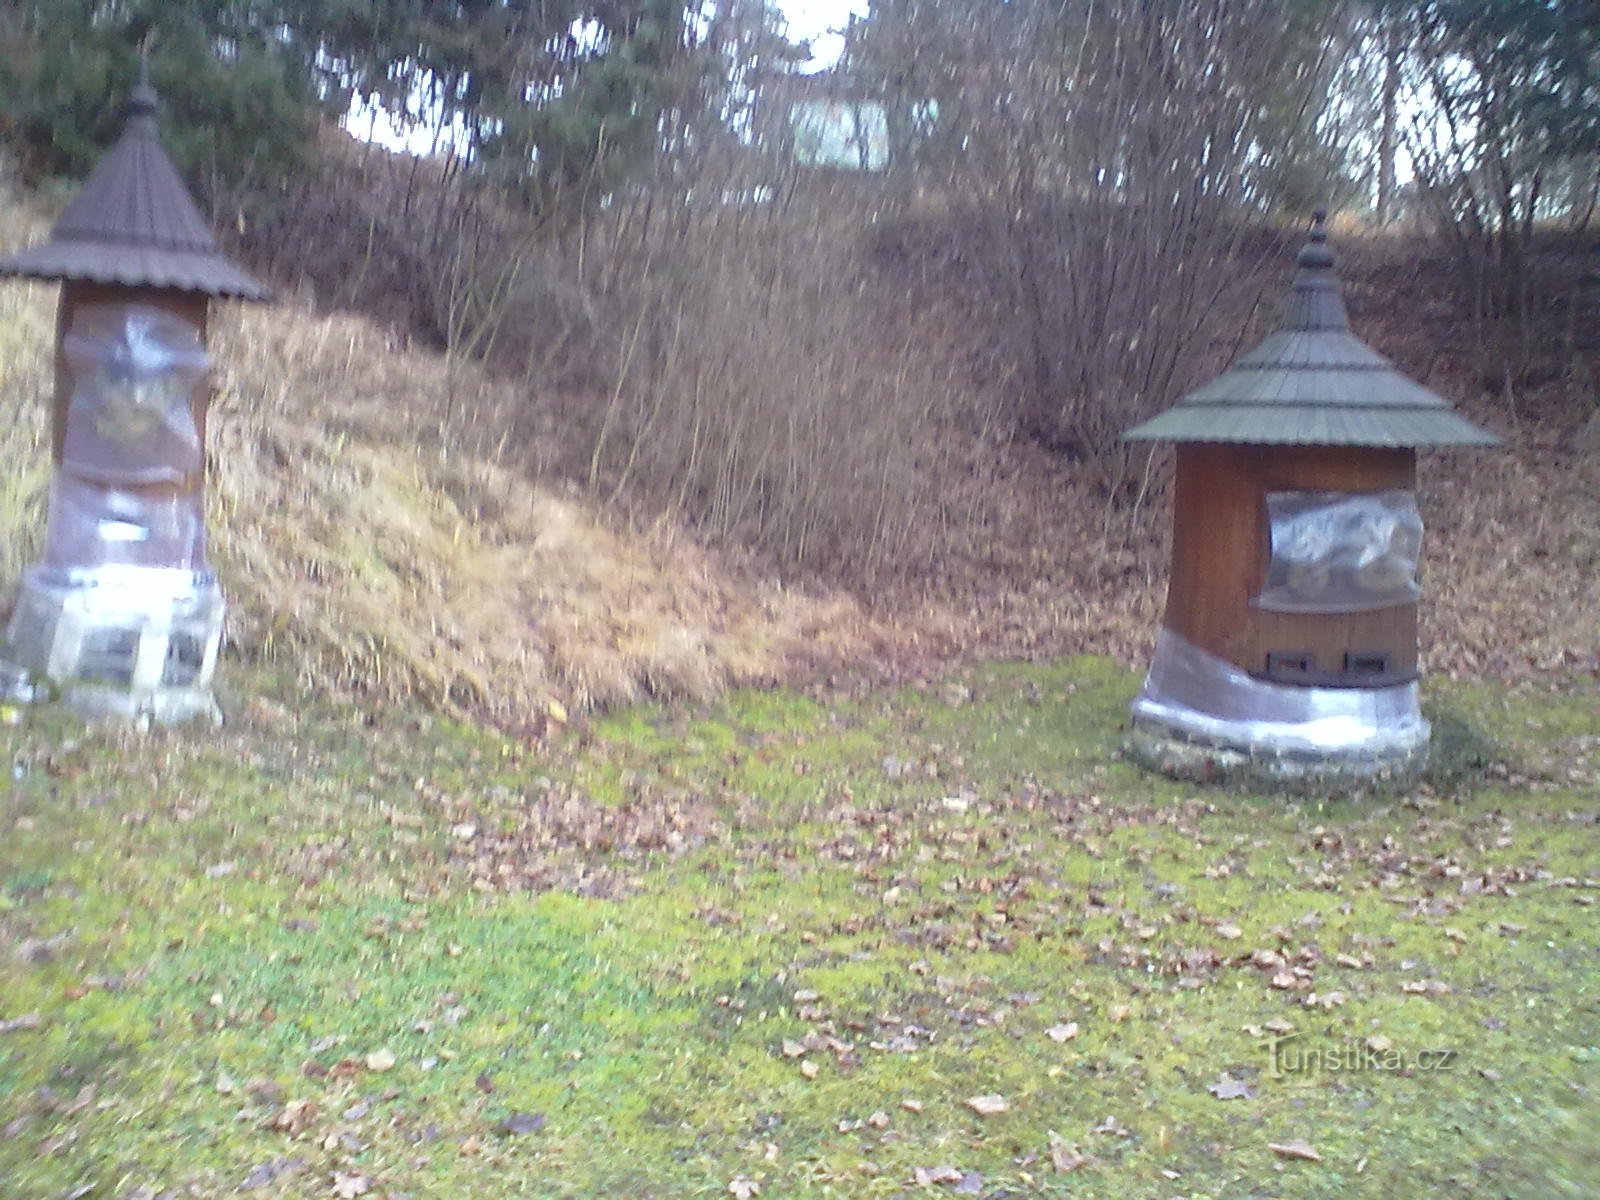 Bee hives near the caves, now already winterized.